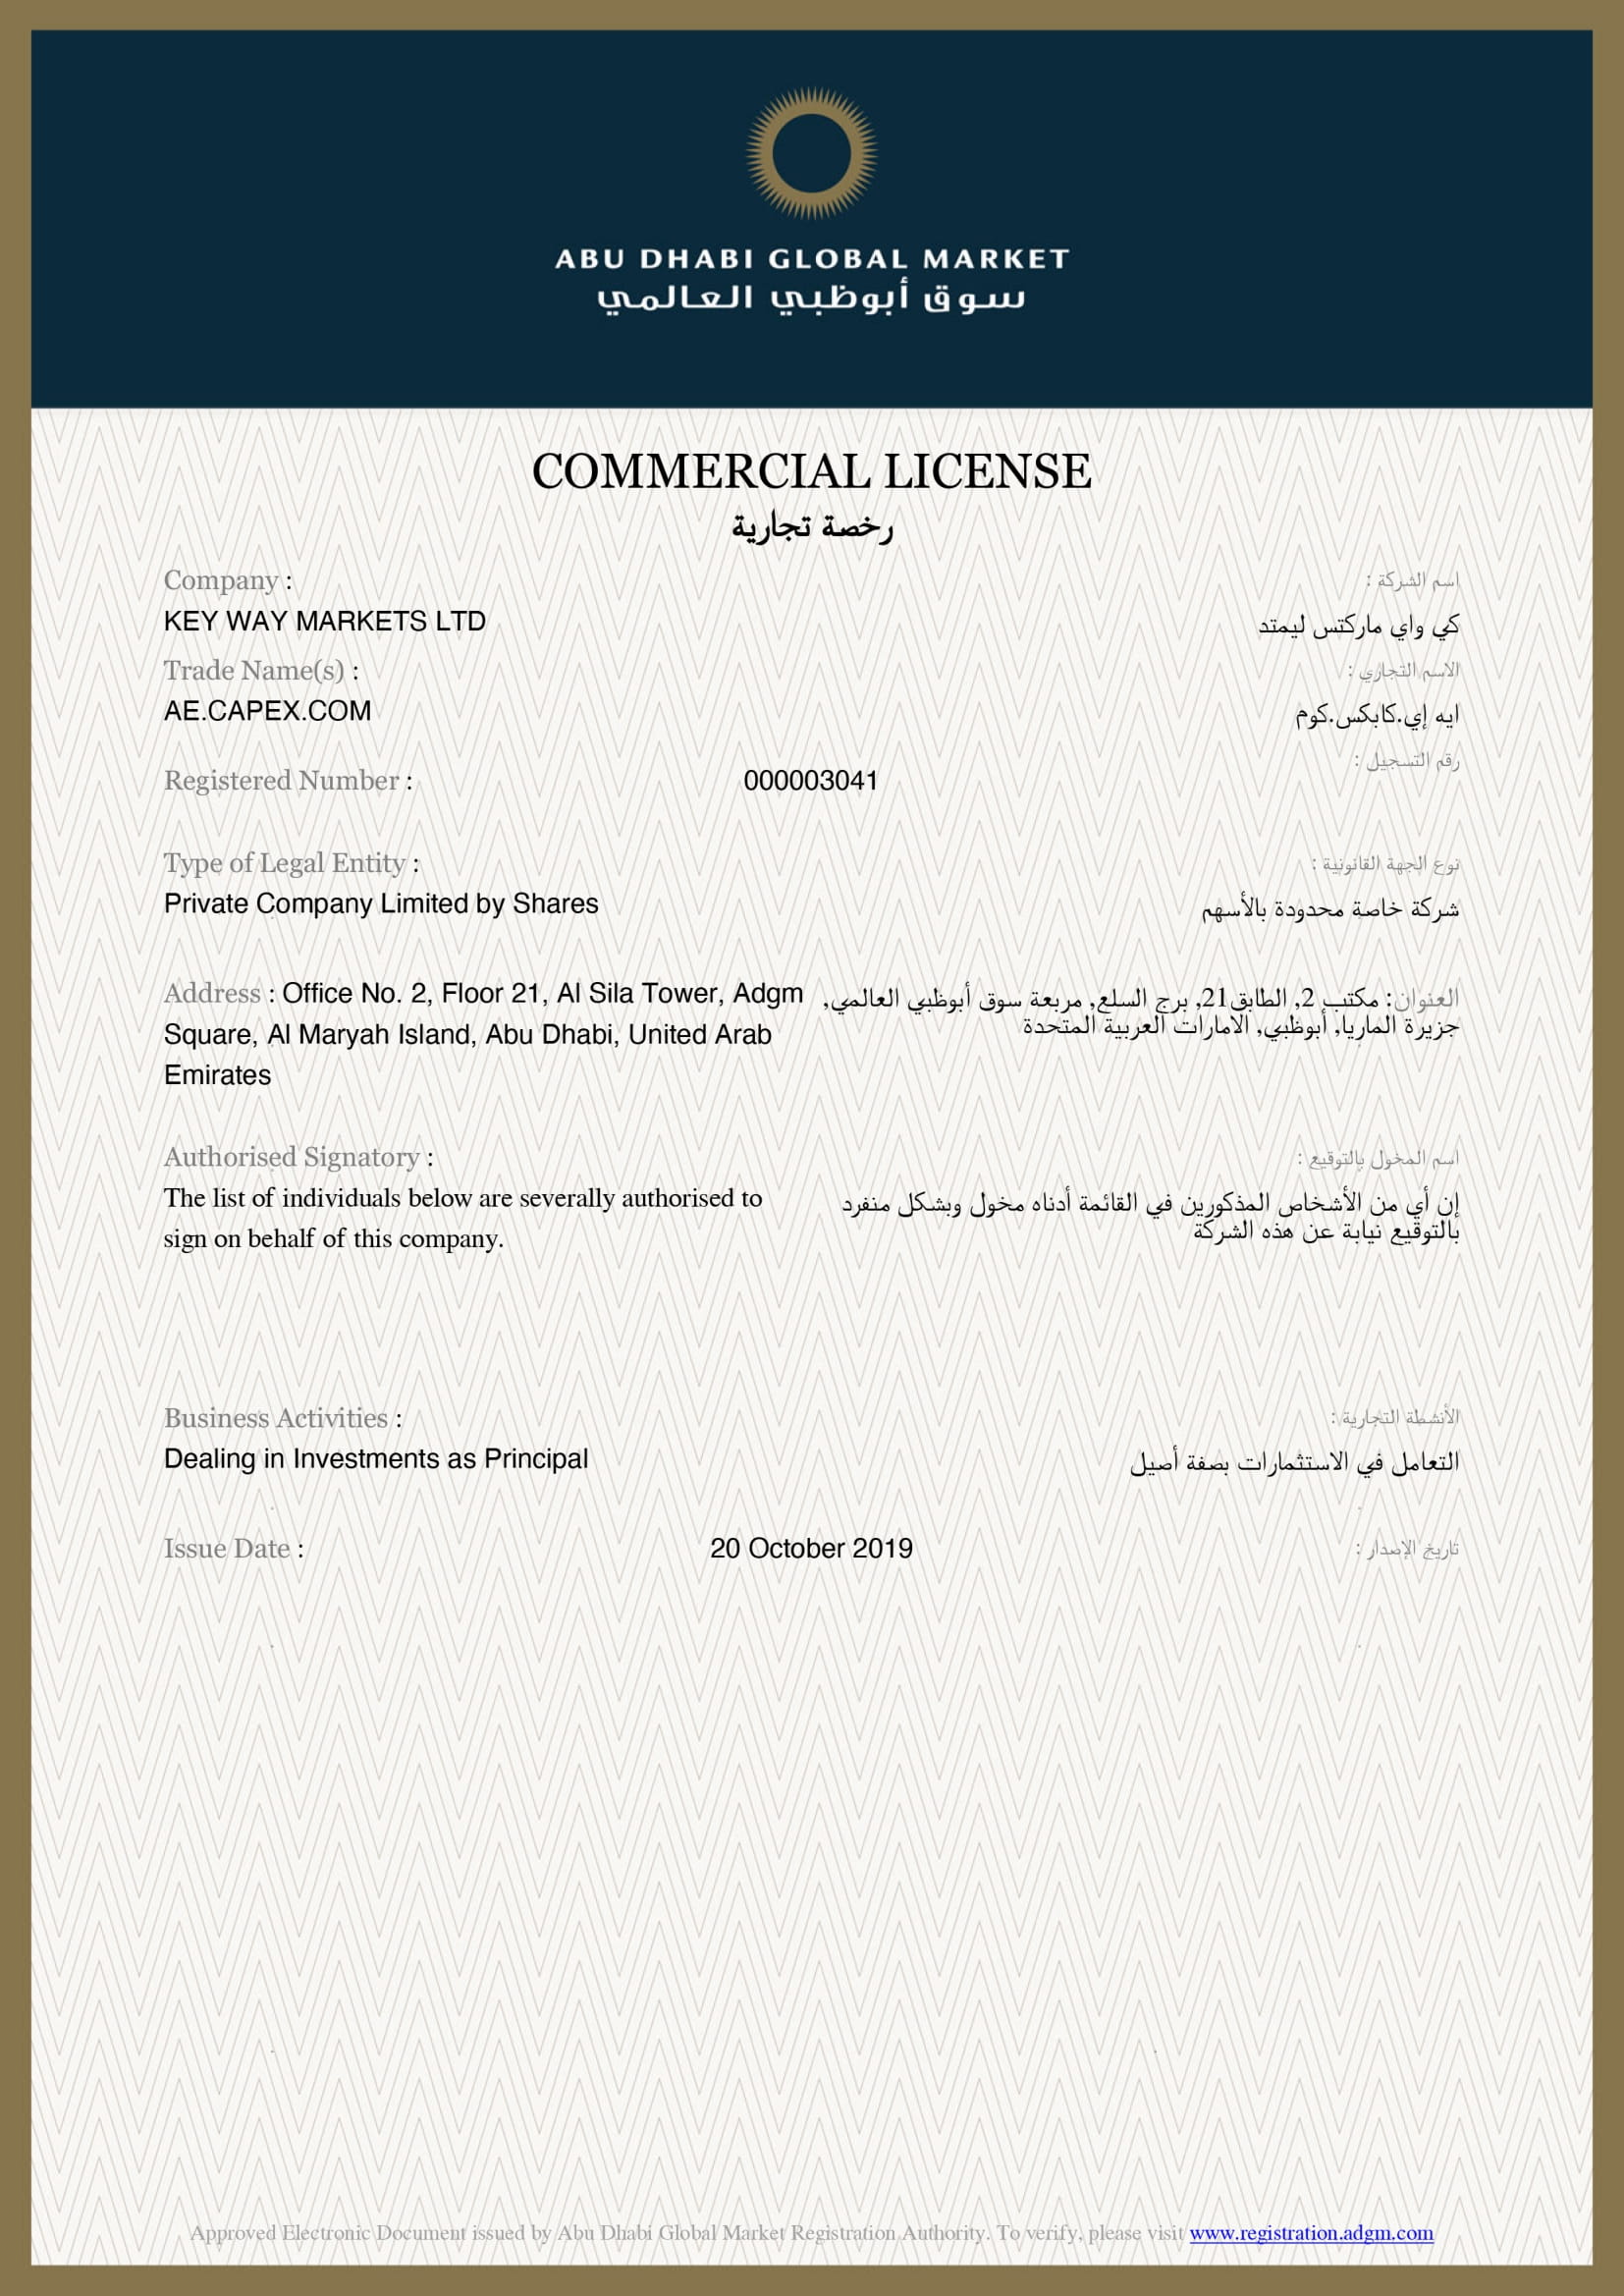 Trade name and commercial license